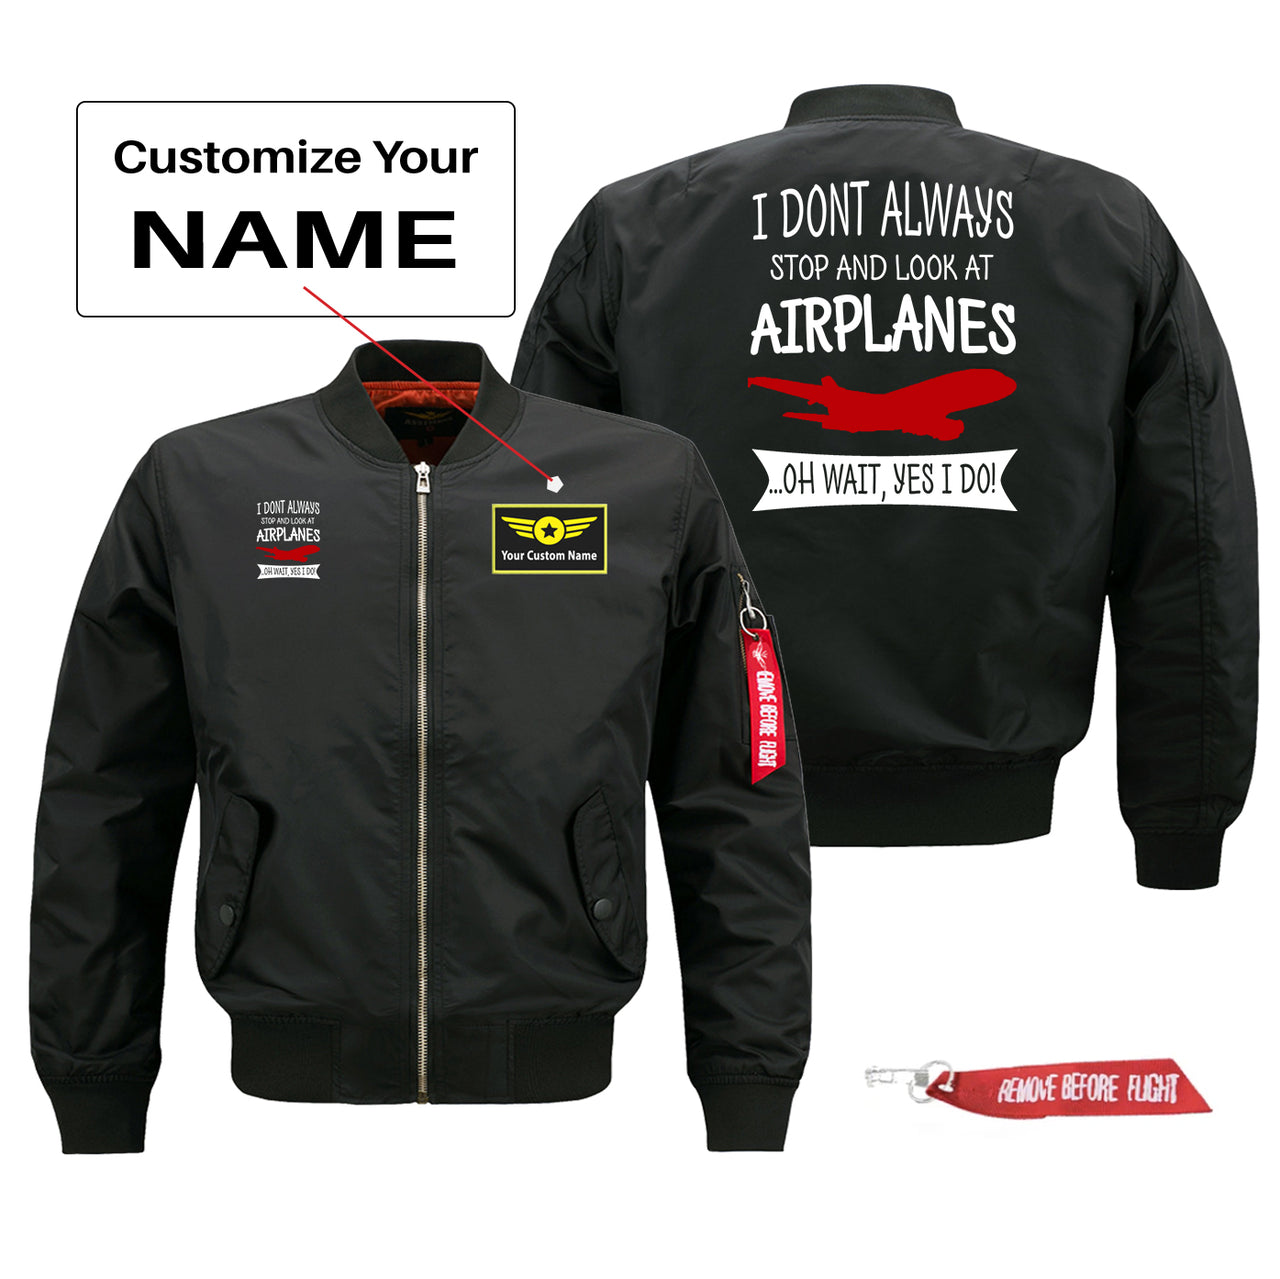 I Don't Always Stop and Look at Airplanes Designed Pilot Jackets (Customizable)